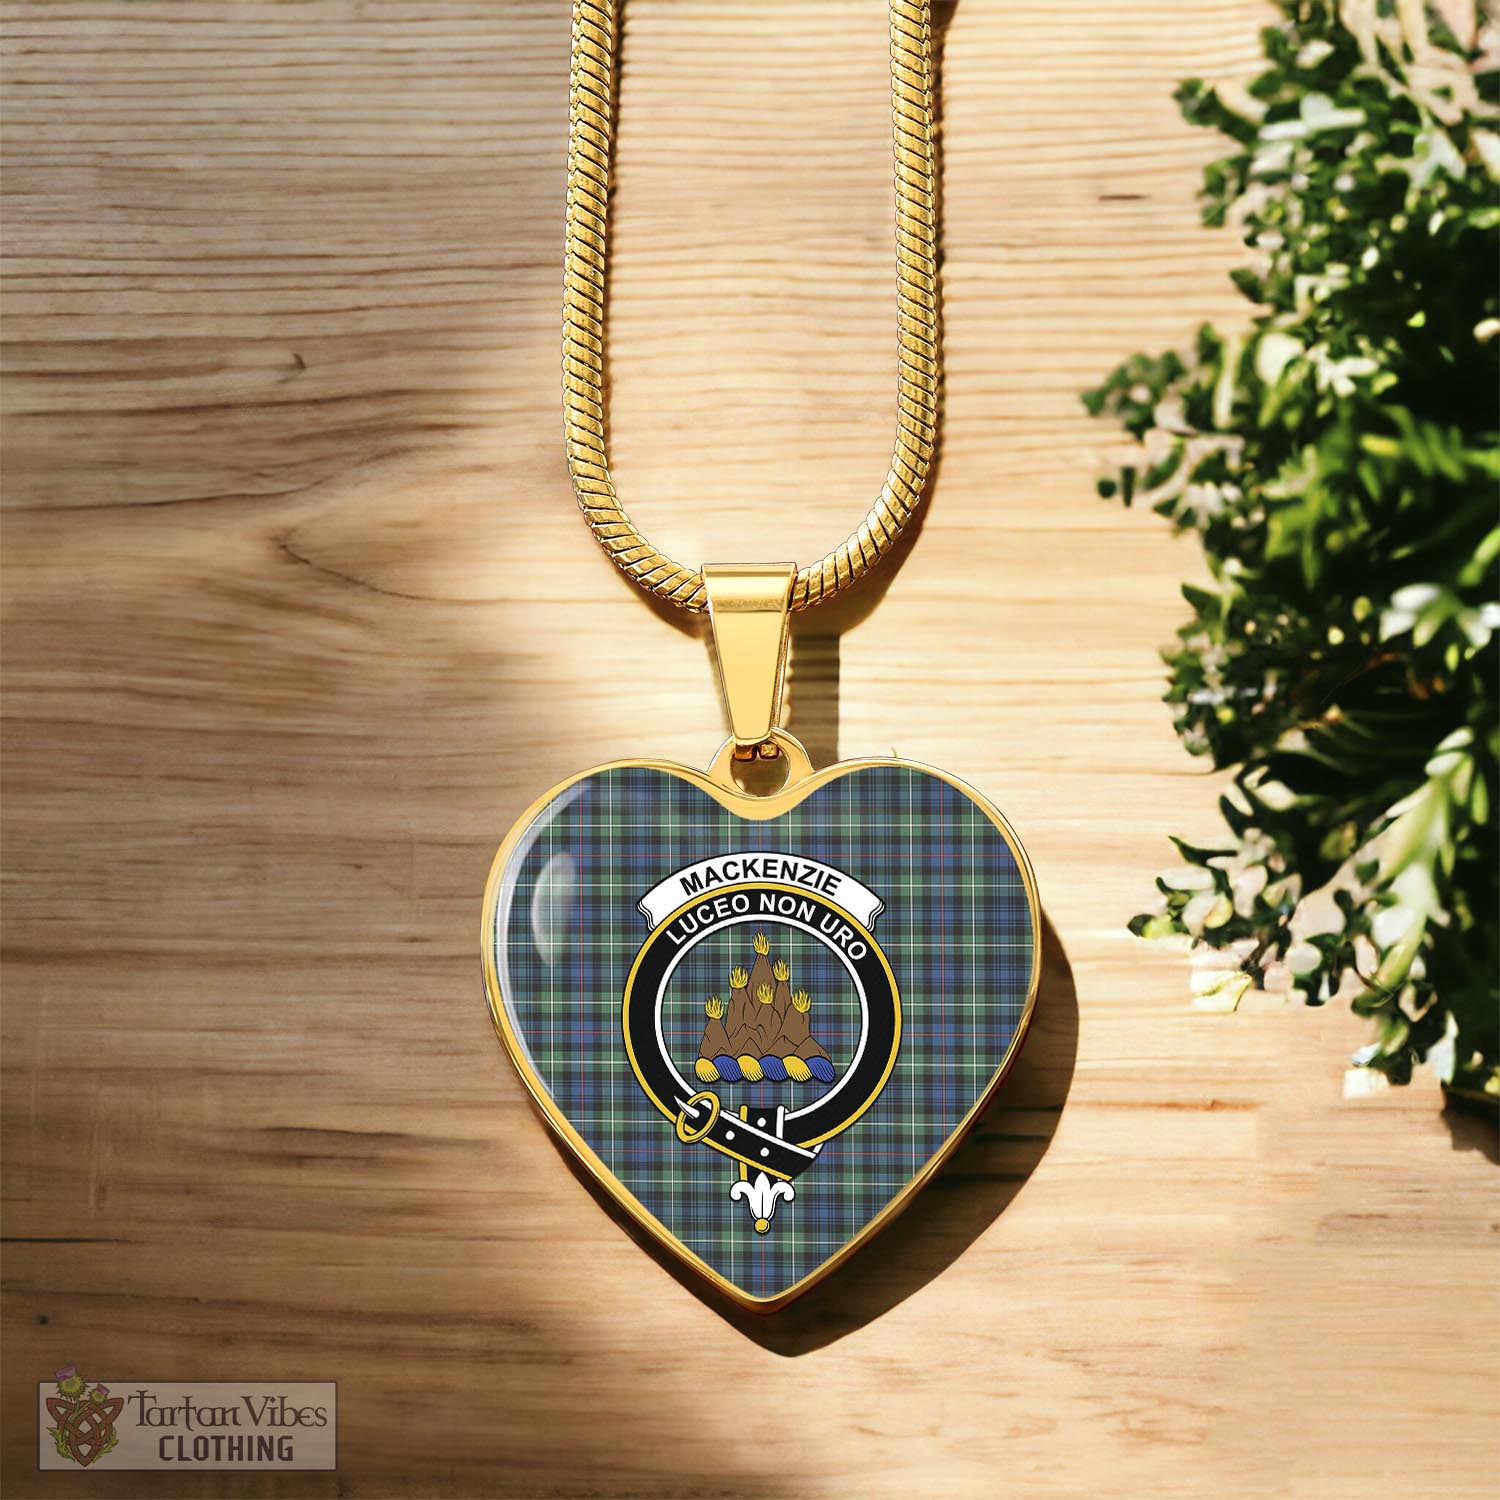 Tartan Vibes Clothing MacKenzie Ancient Tartan Heart Necklace with Family Crest